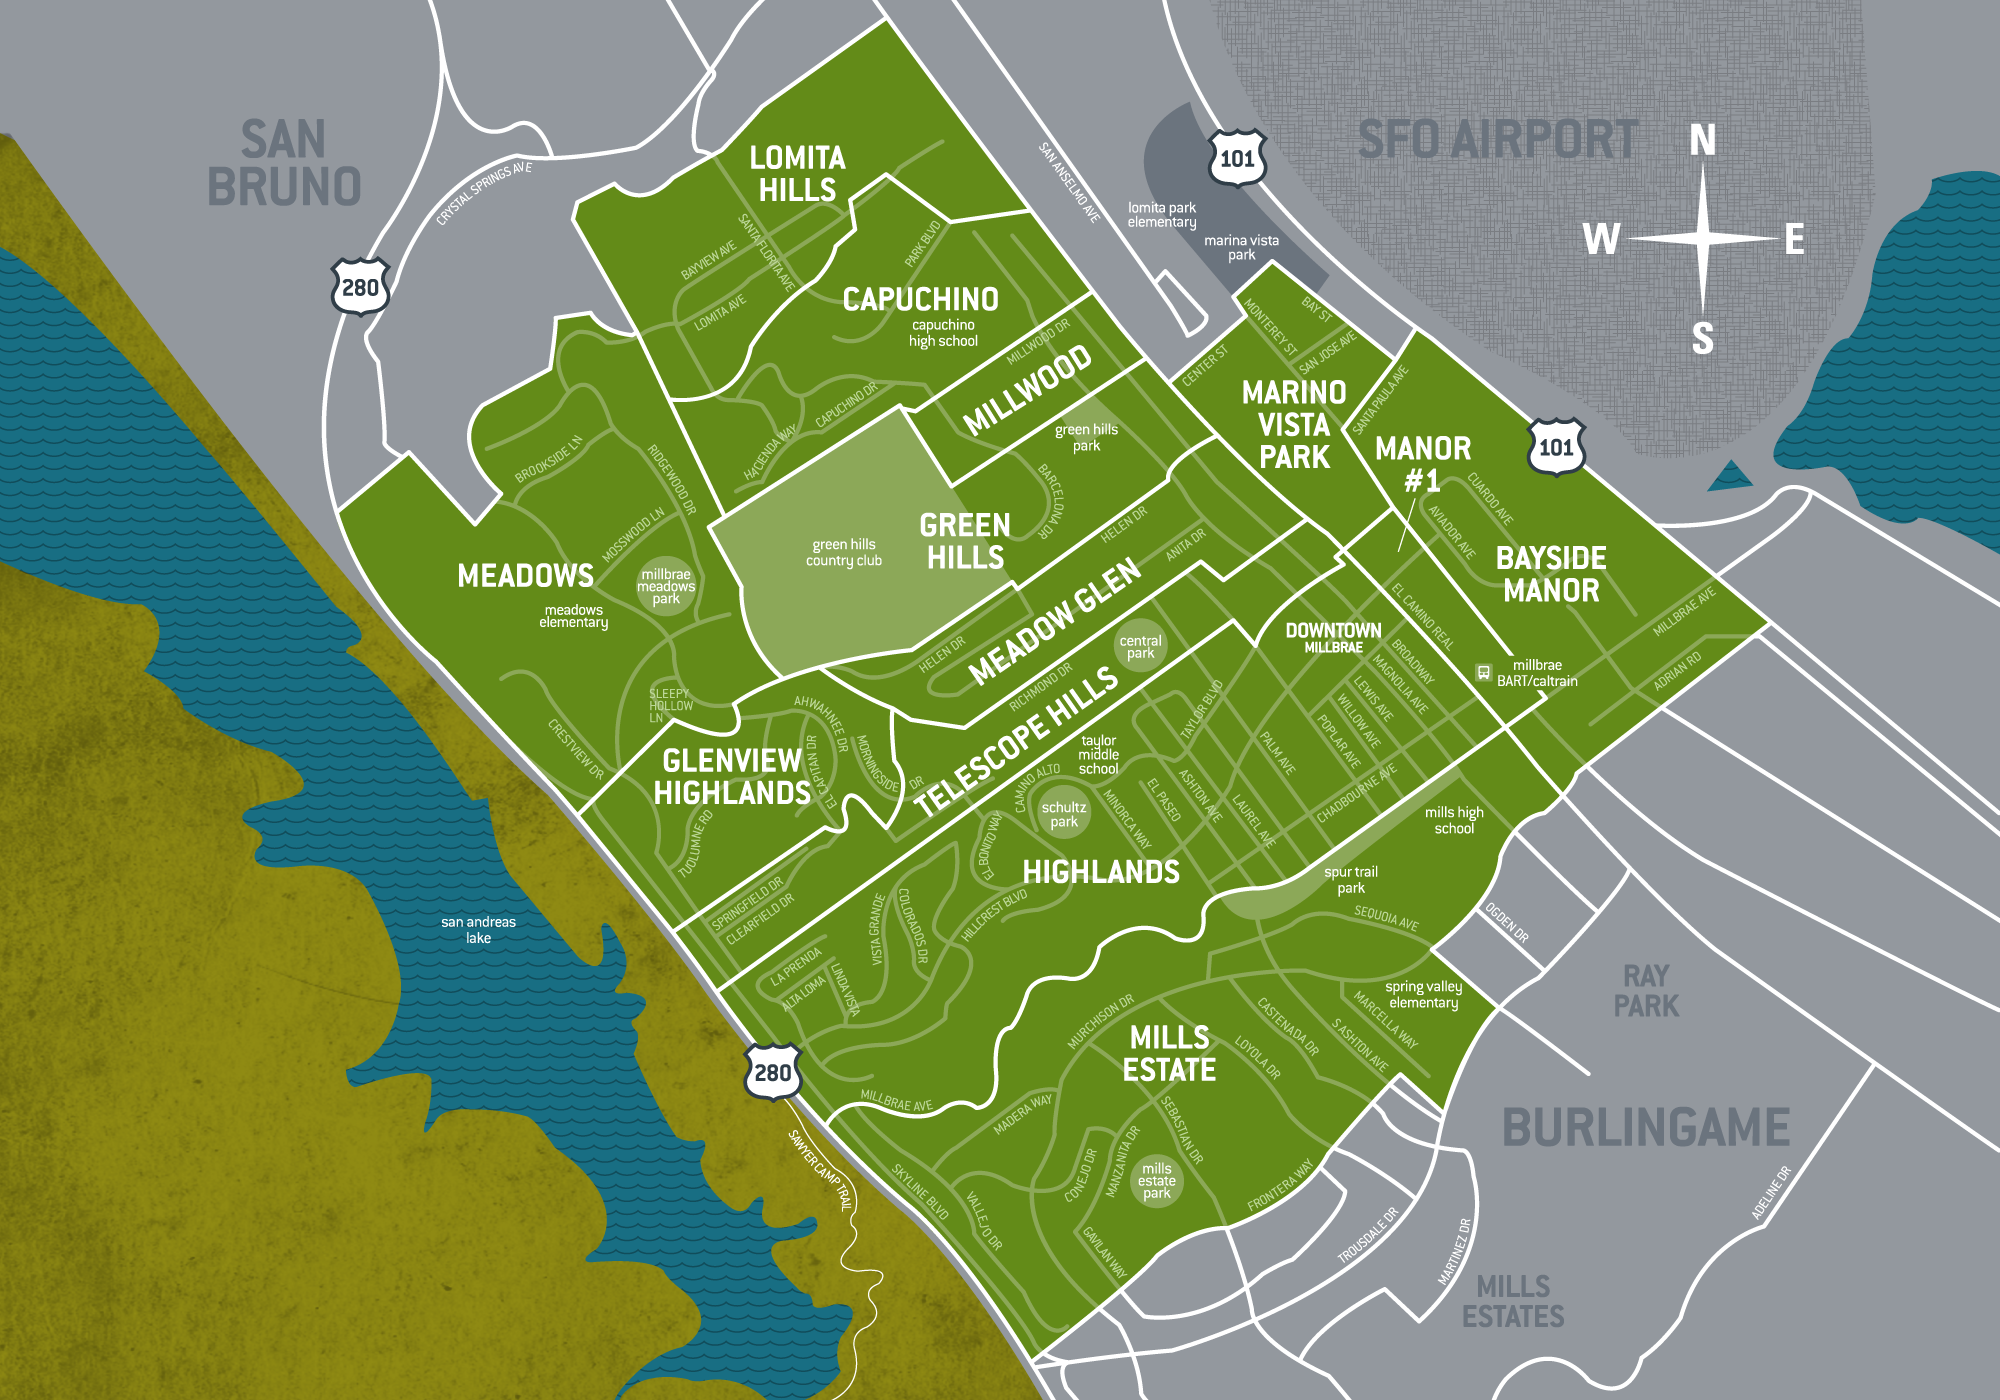 Millbrae area map colored in green